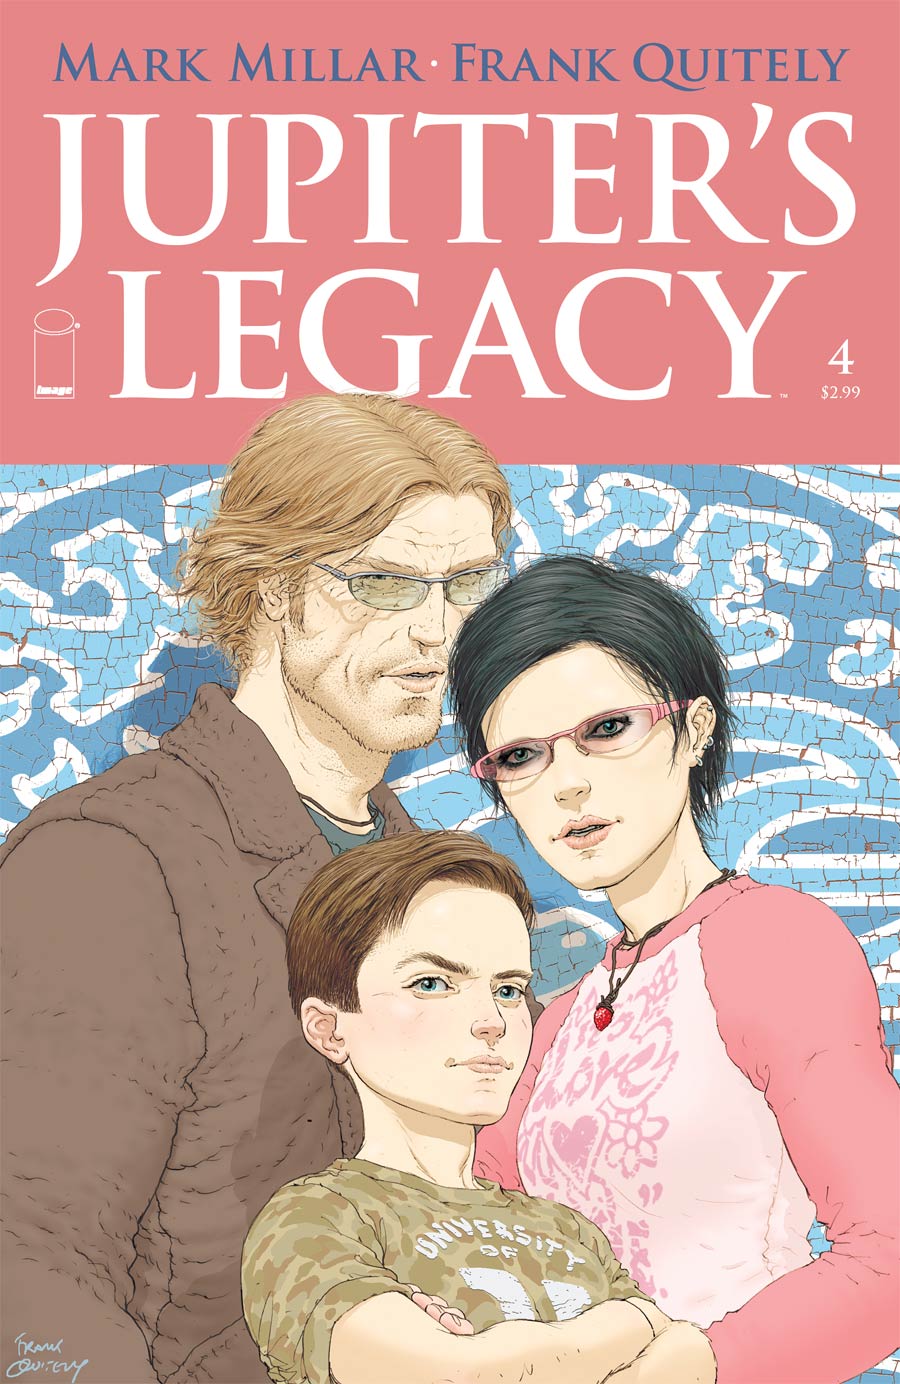 Jupiters Legacy #4 Cover A Frank Quitely